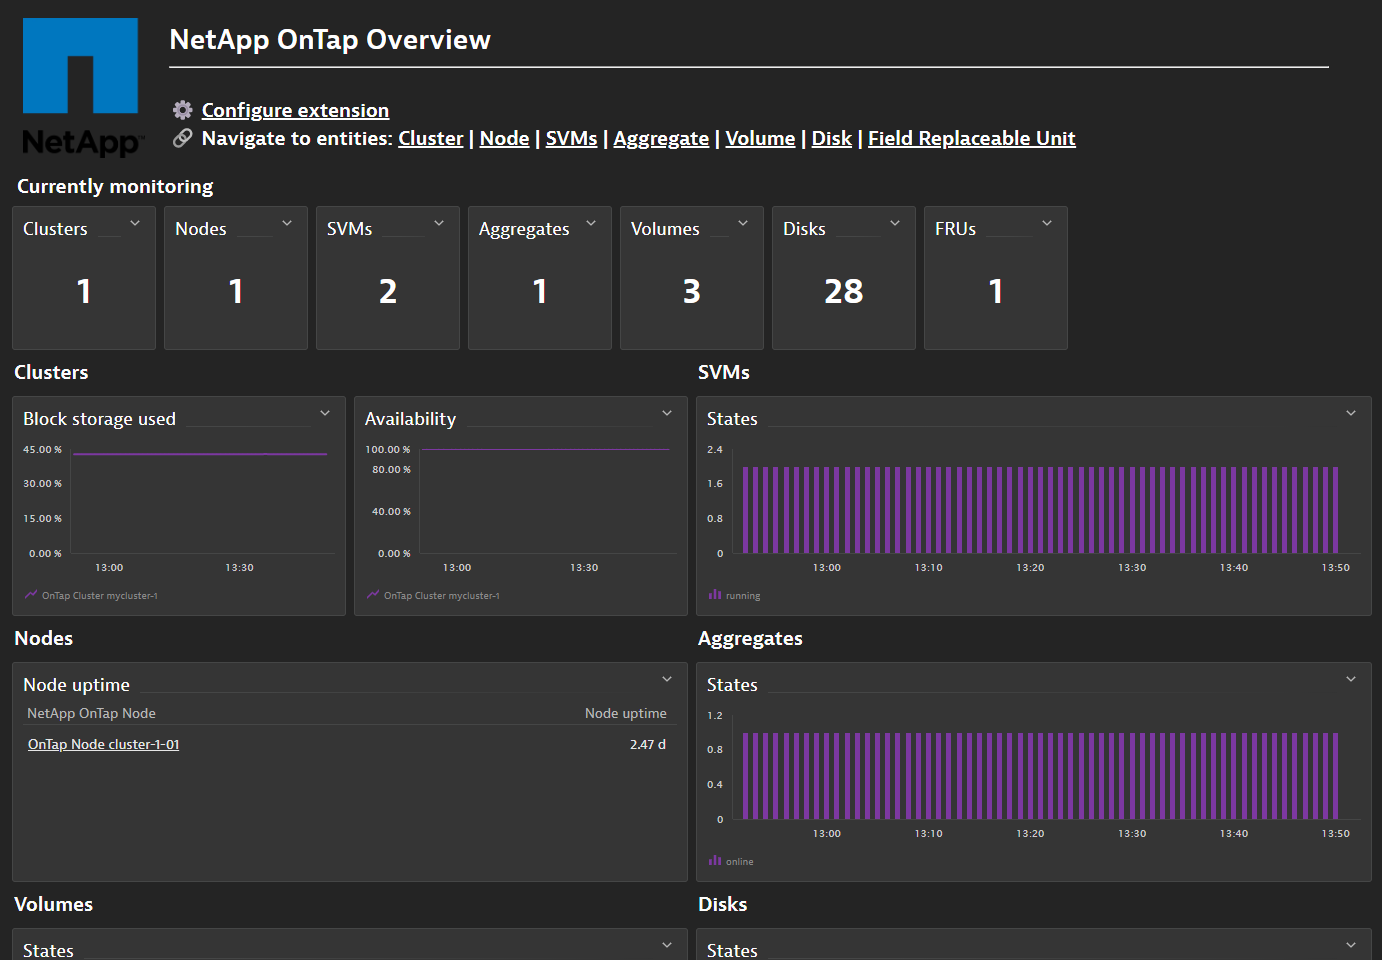 The NetApp OnTap overview dashboard